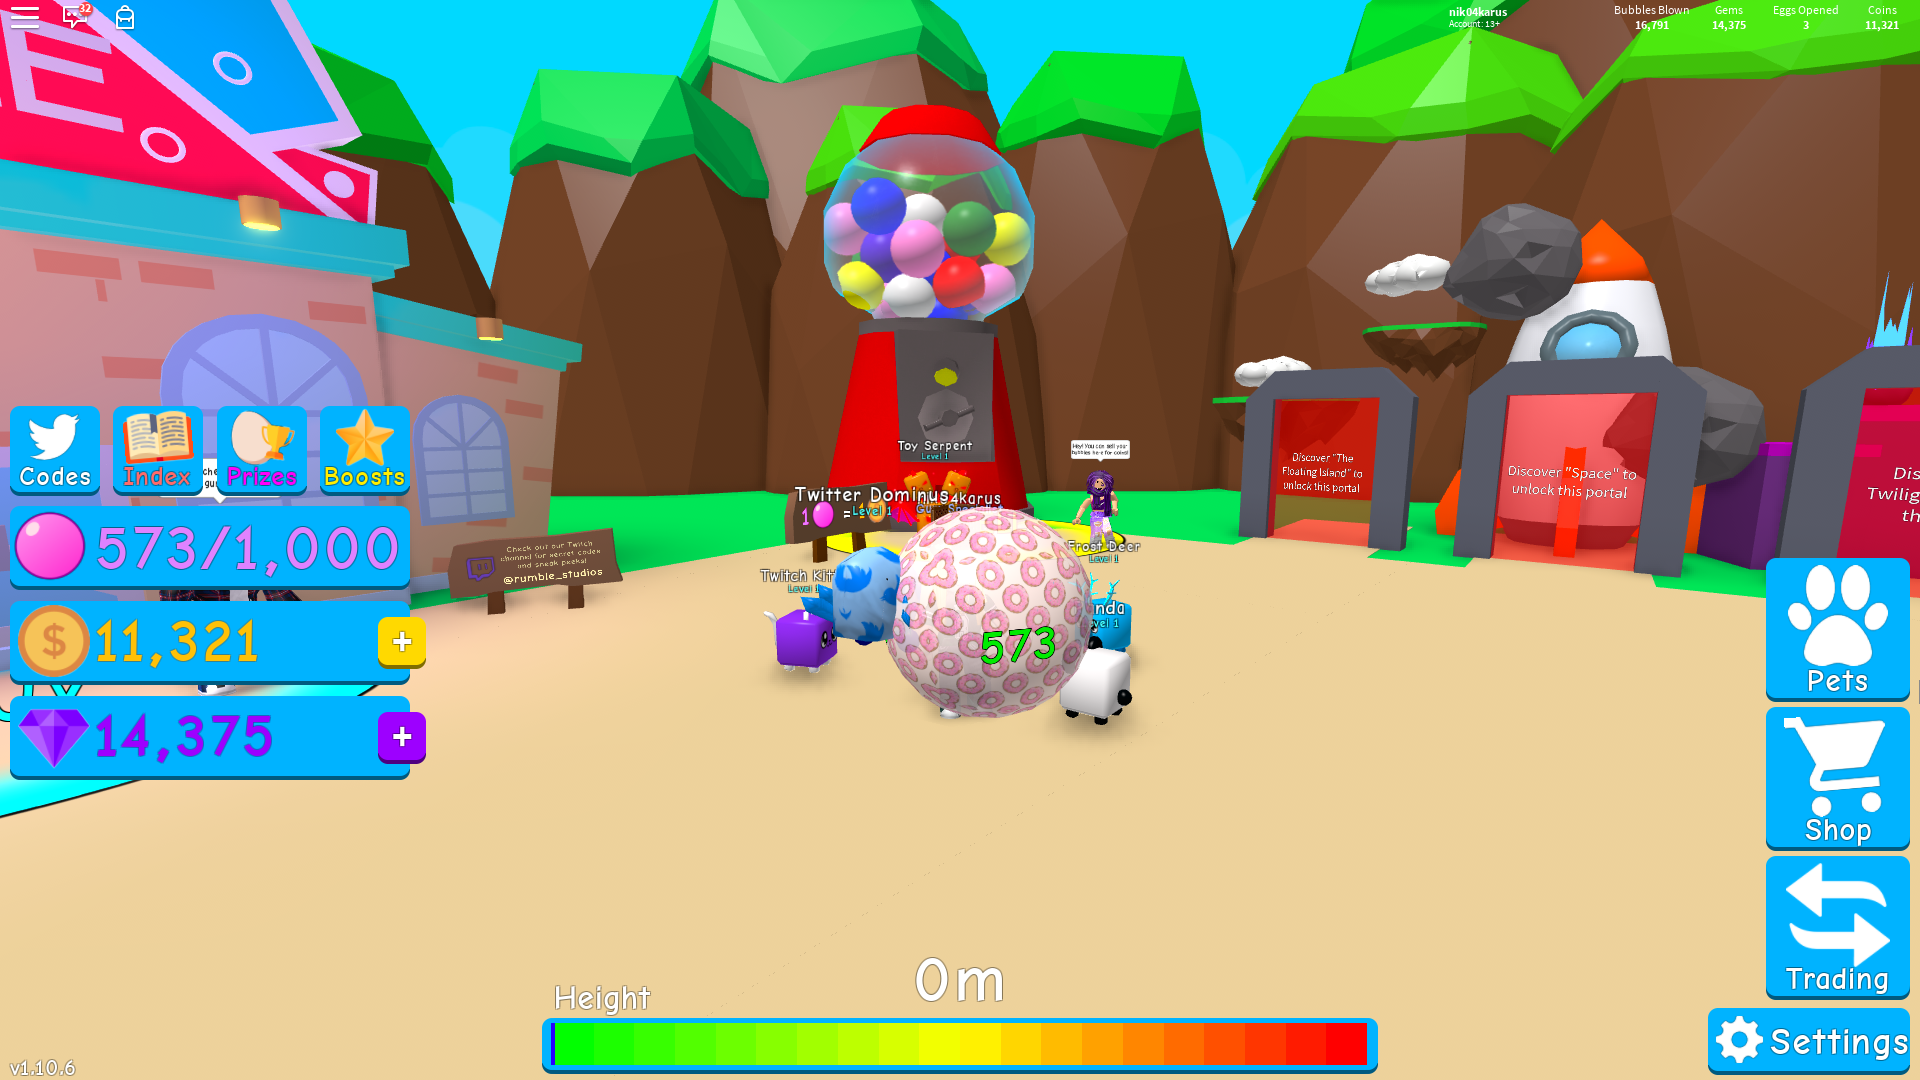 bubble-gum-simulator-all-working-codes-to-get-free-coins-gems-pets-and-more-fan-site-roblox